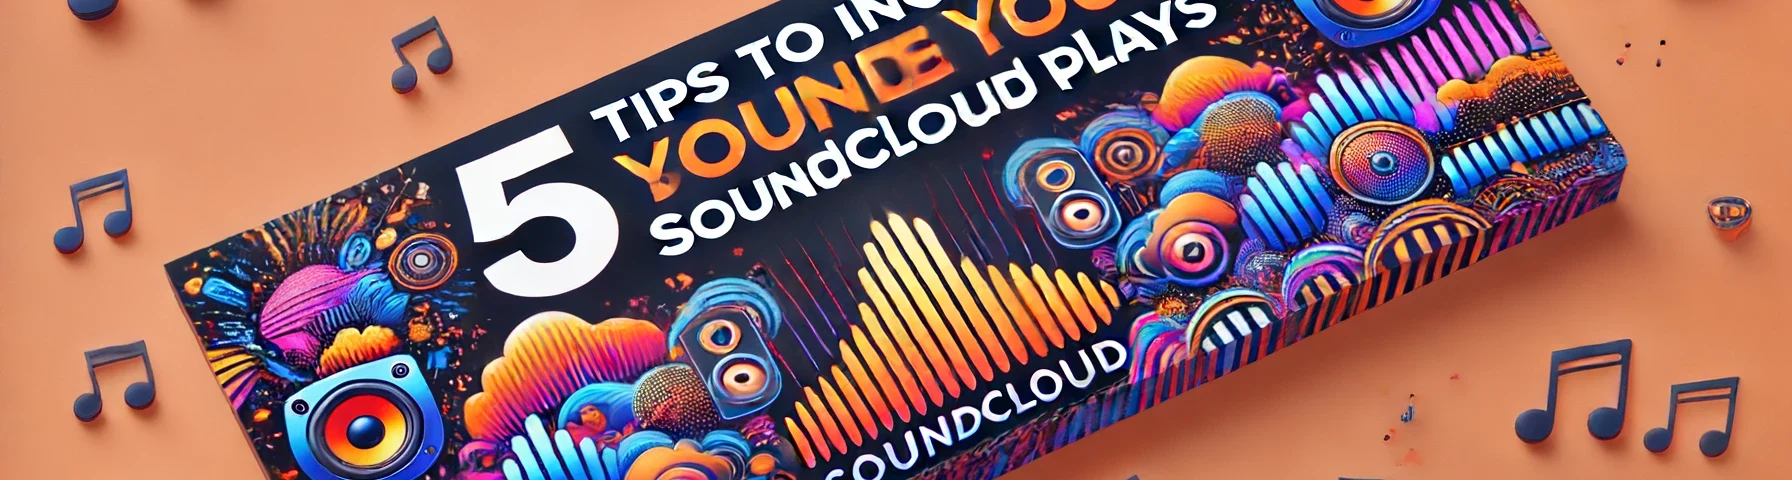 Tips to Increase Your SoundCloud Plays